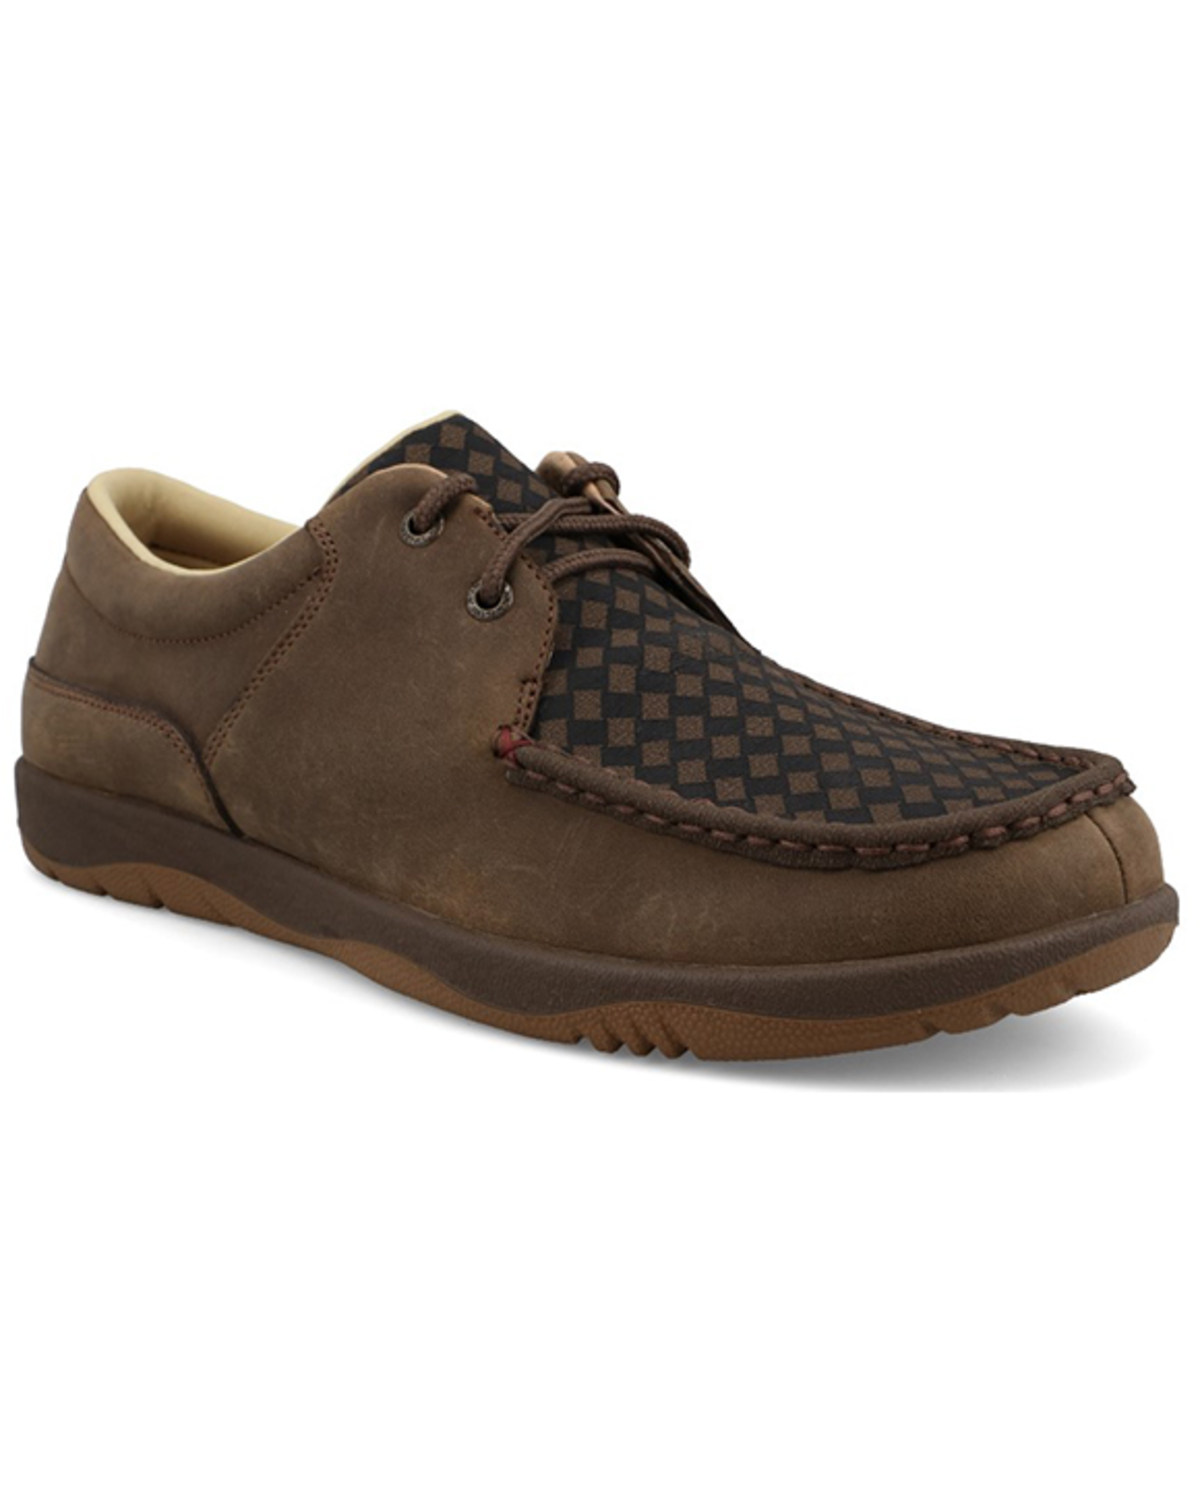 Twisted X Men's Casual Boat Shoes - Moc Toe